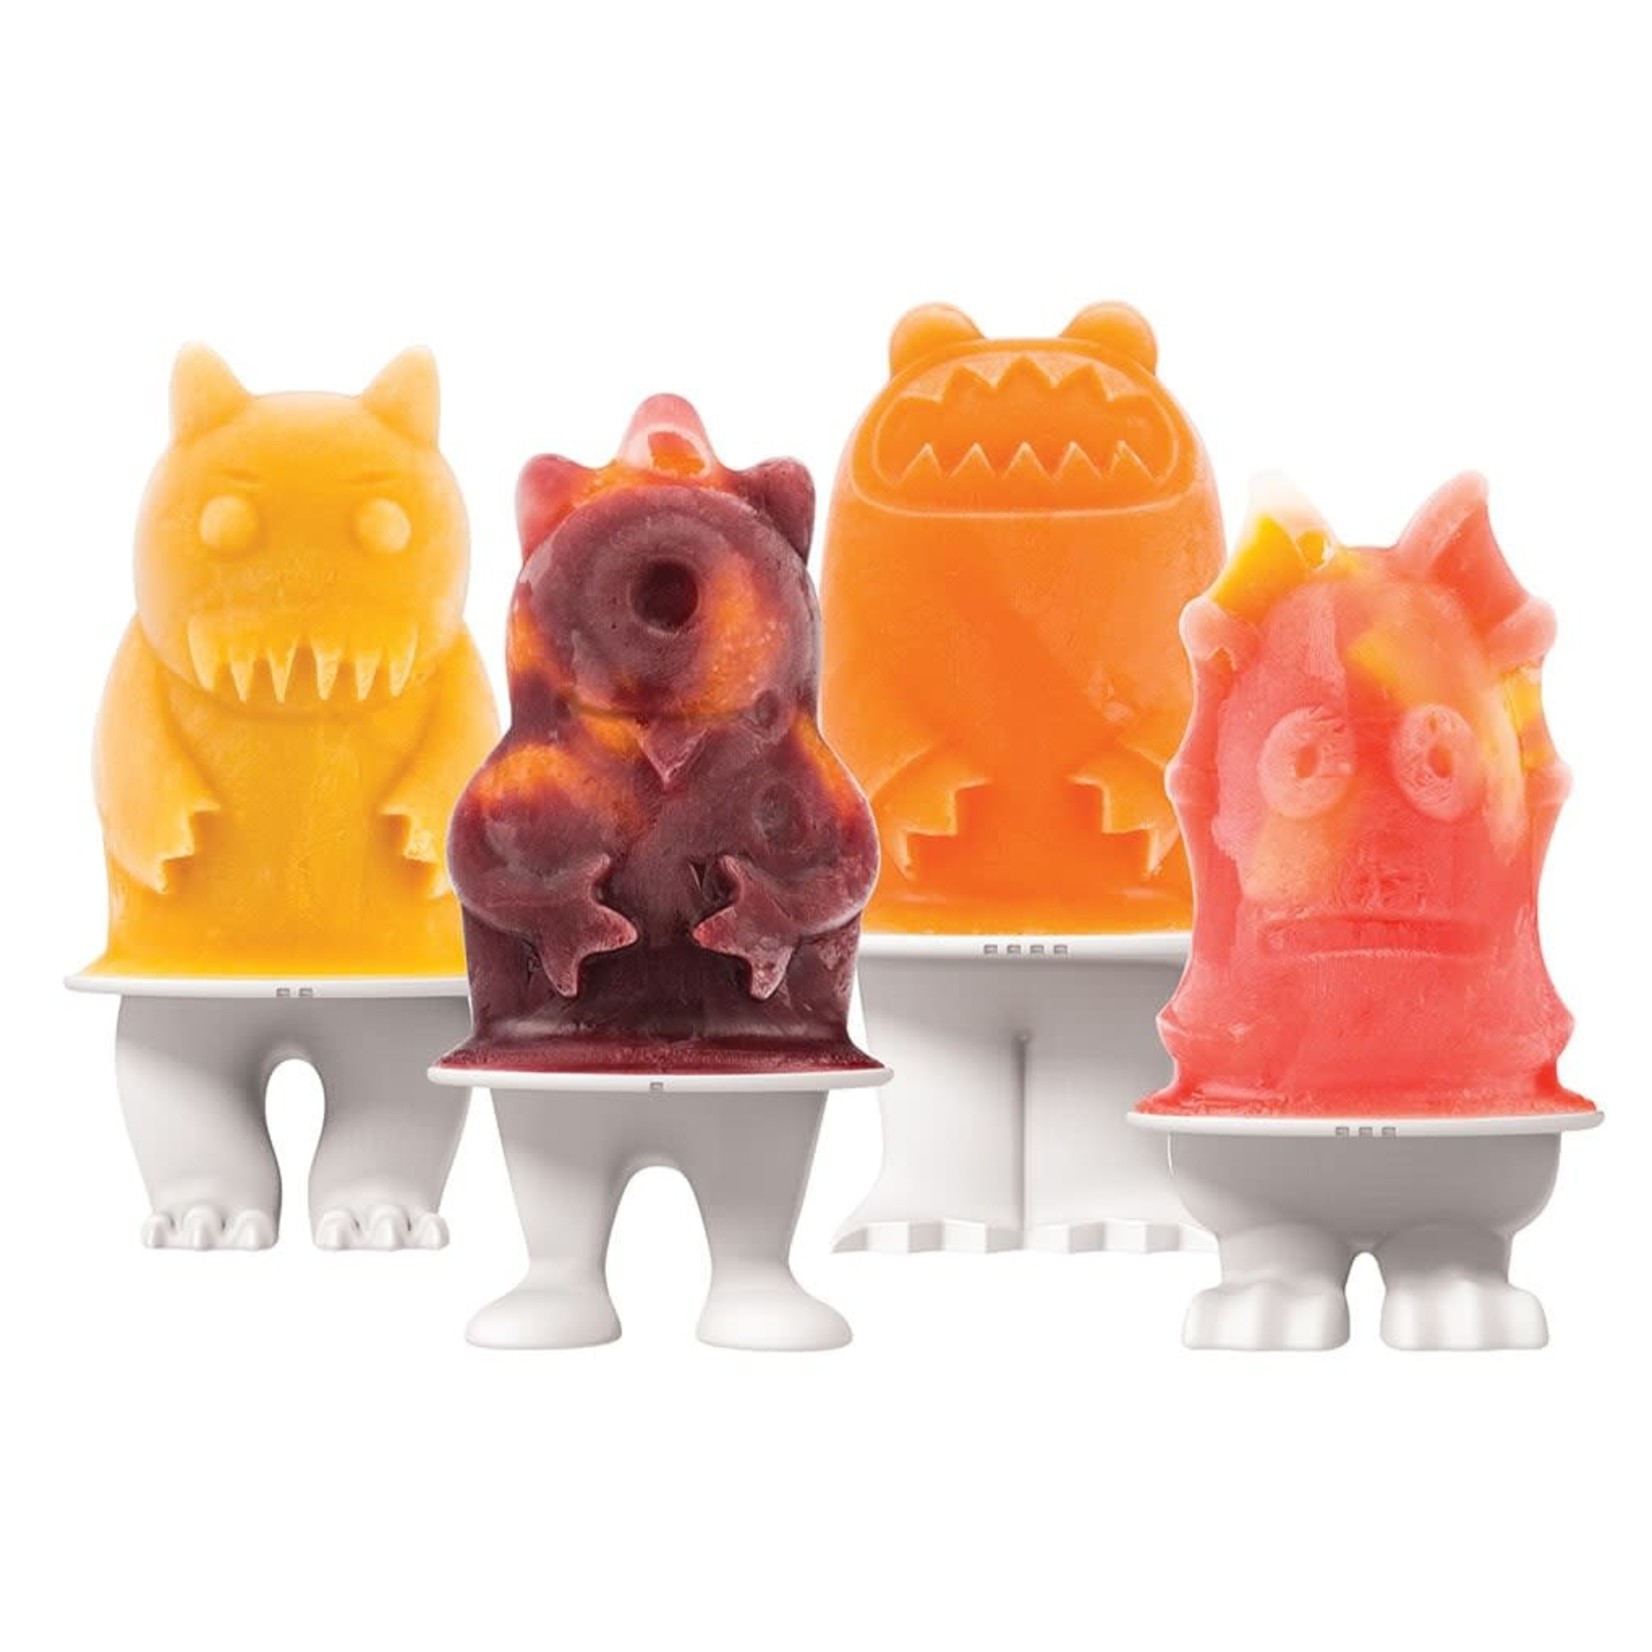 TOVOLO TOVOLO Monster Pop Molds